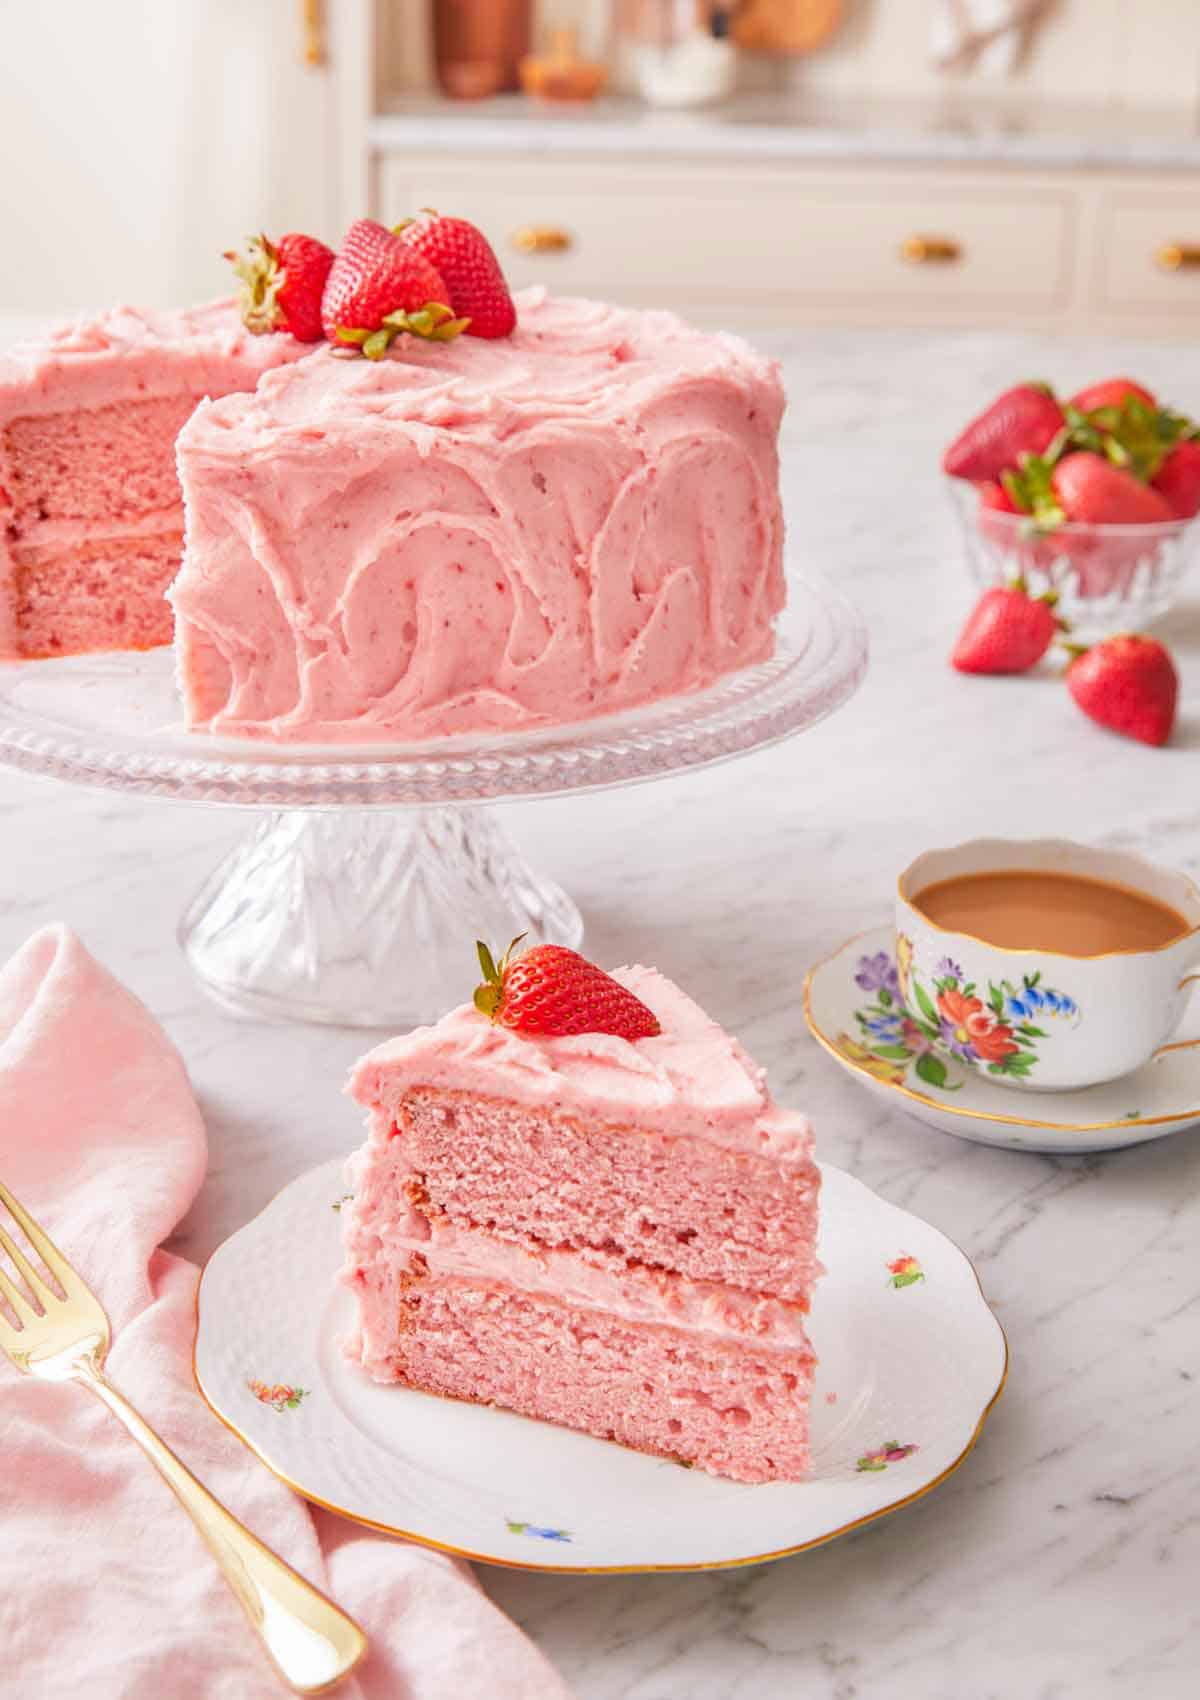 A strawberry cake on a cake stand with a slice cut and placed in front.